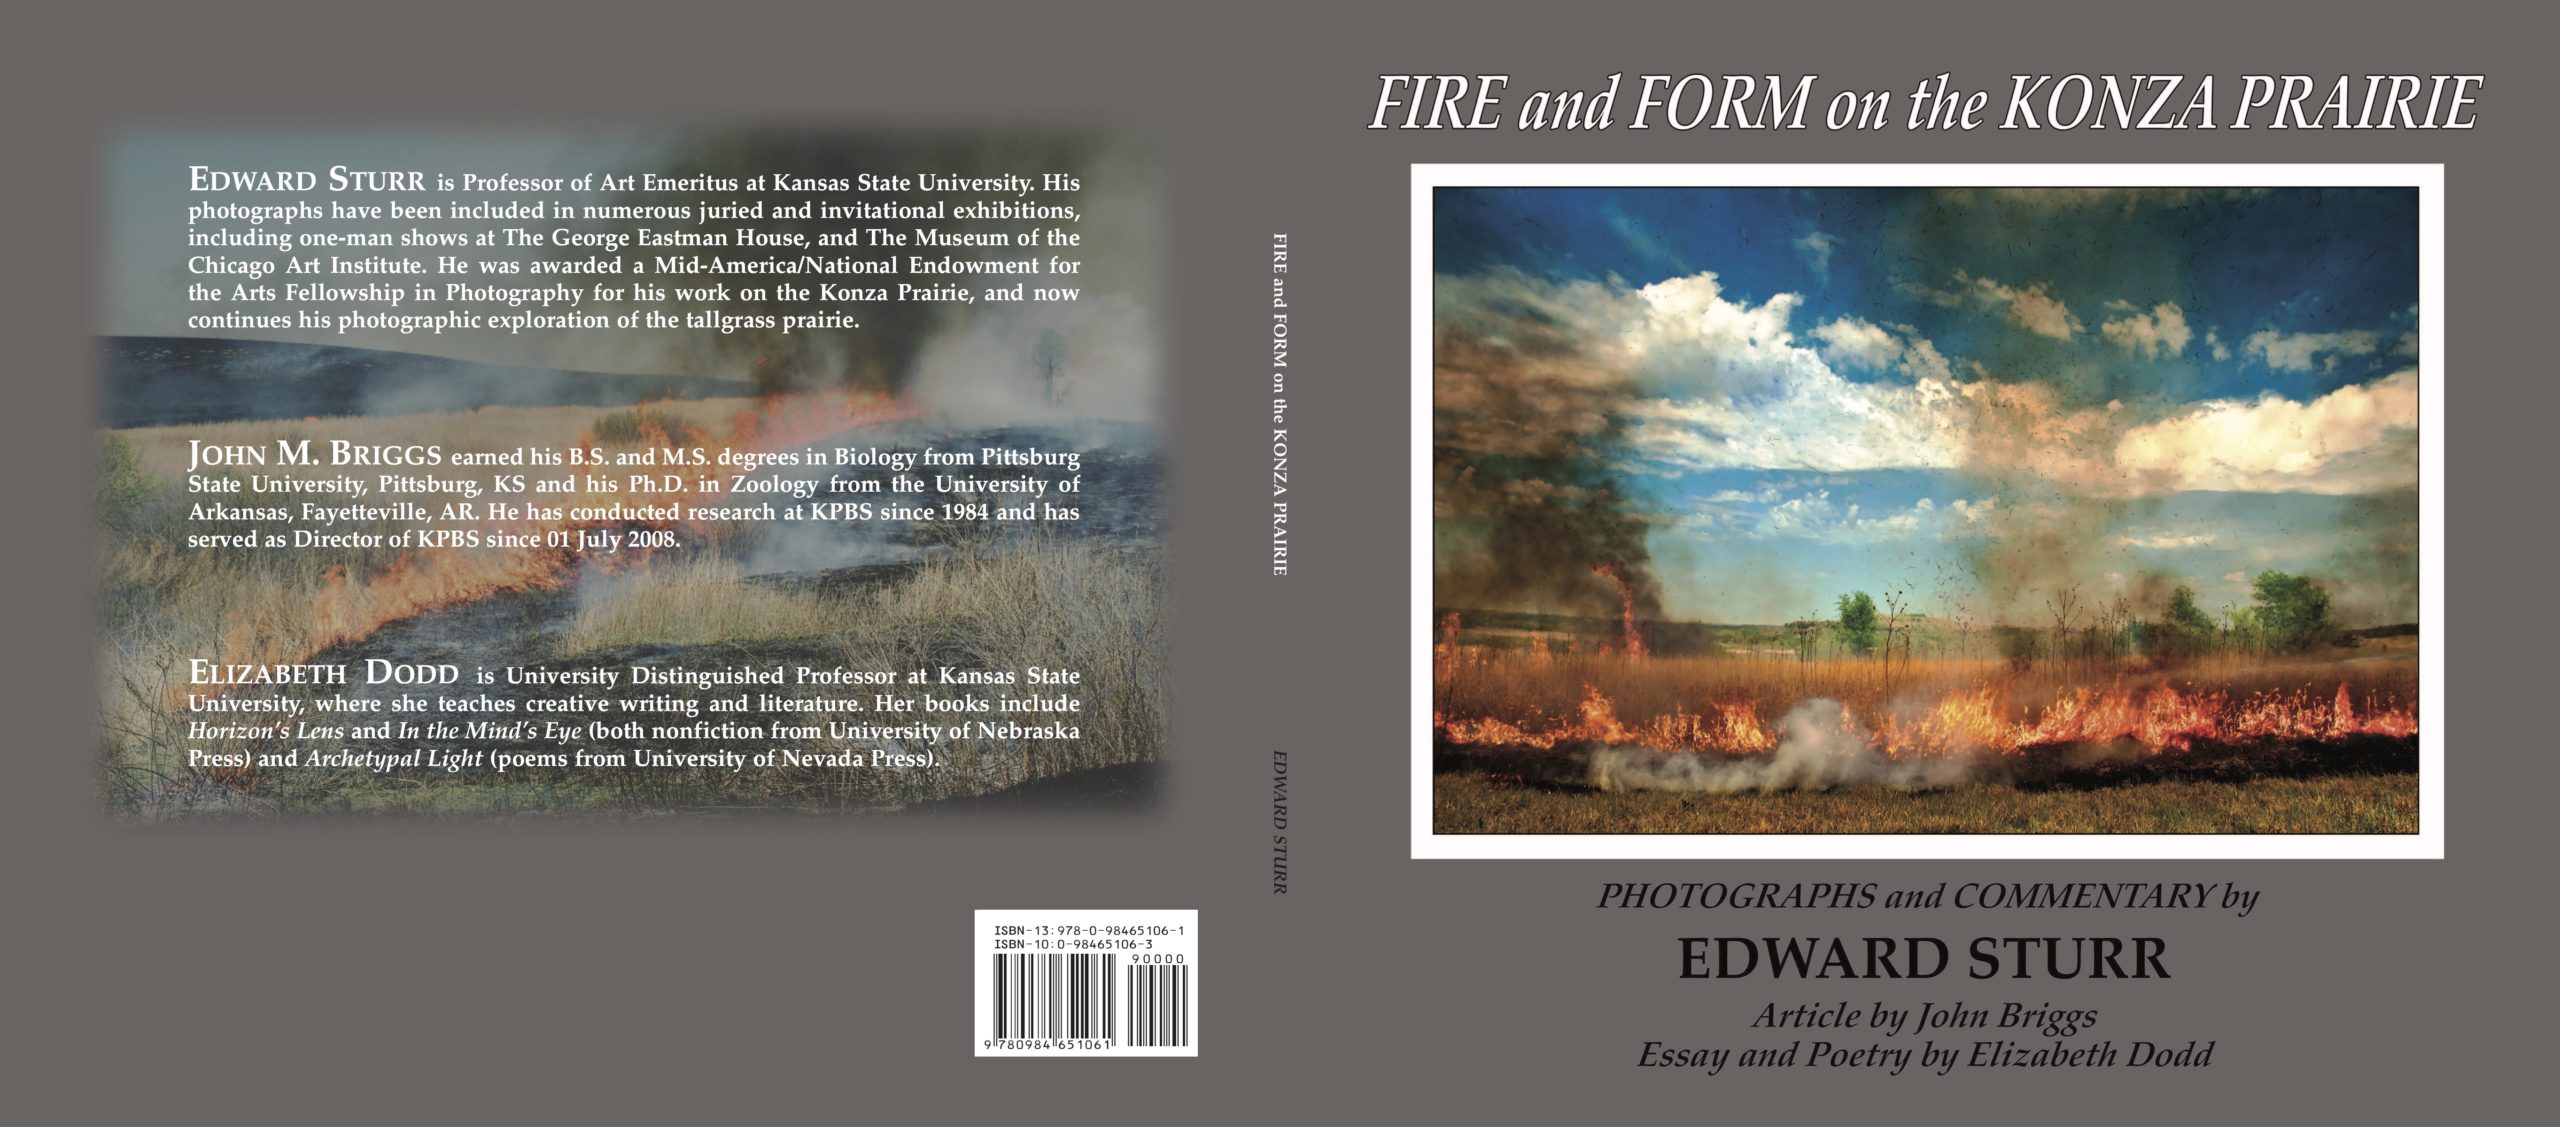 Fire and Form cover